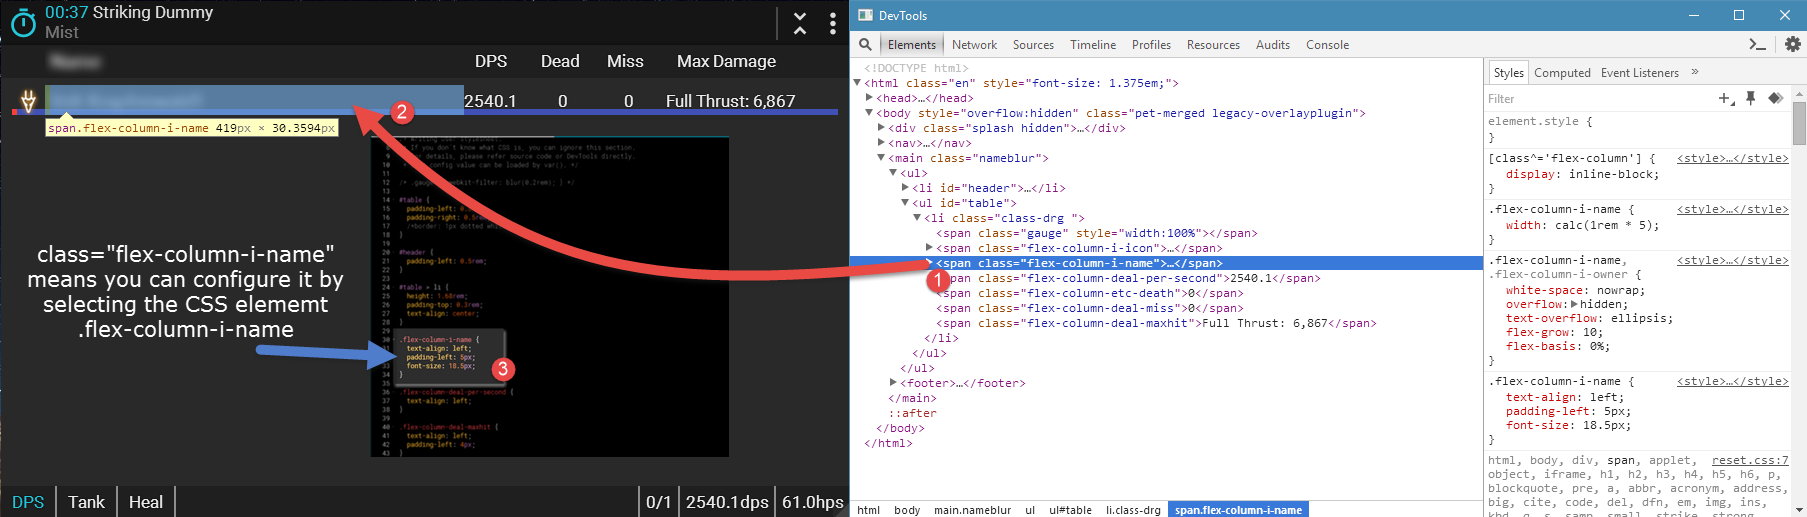 how to use custom CSS and DevTools